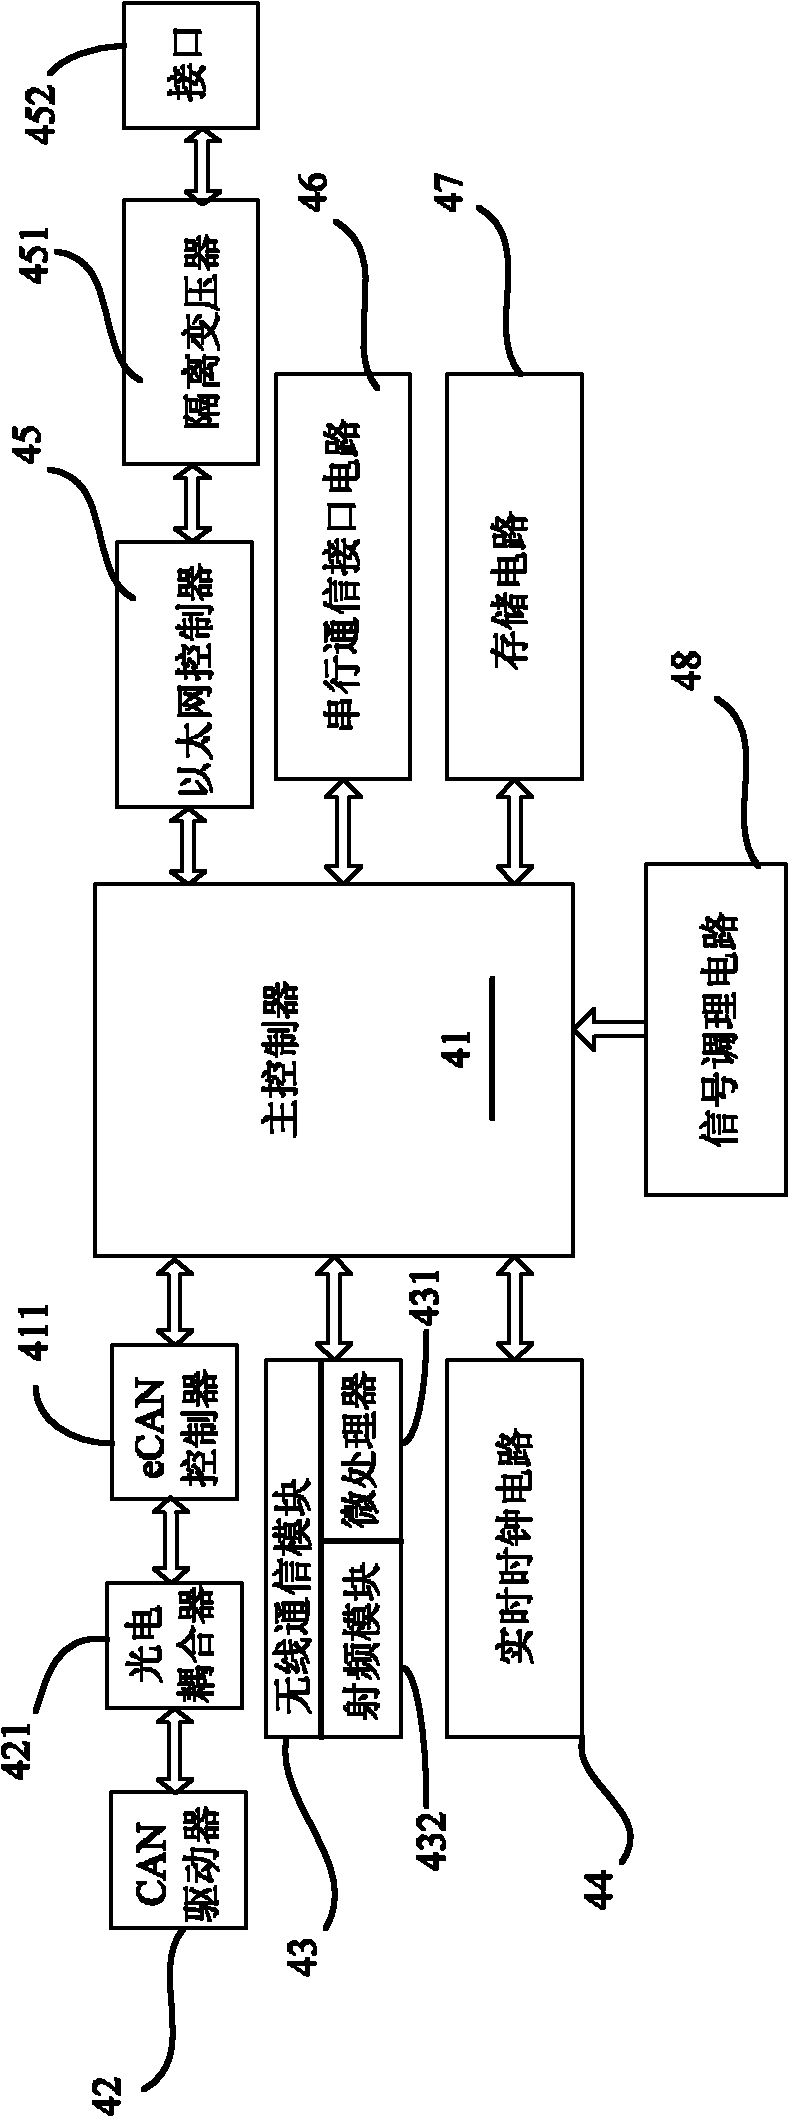 Bullet train state monitoring system and multifunctional hybrid gateway thereof